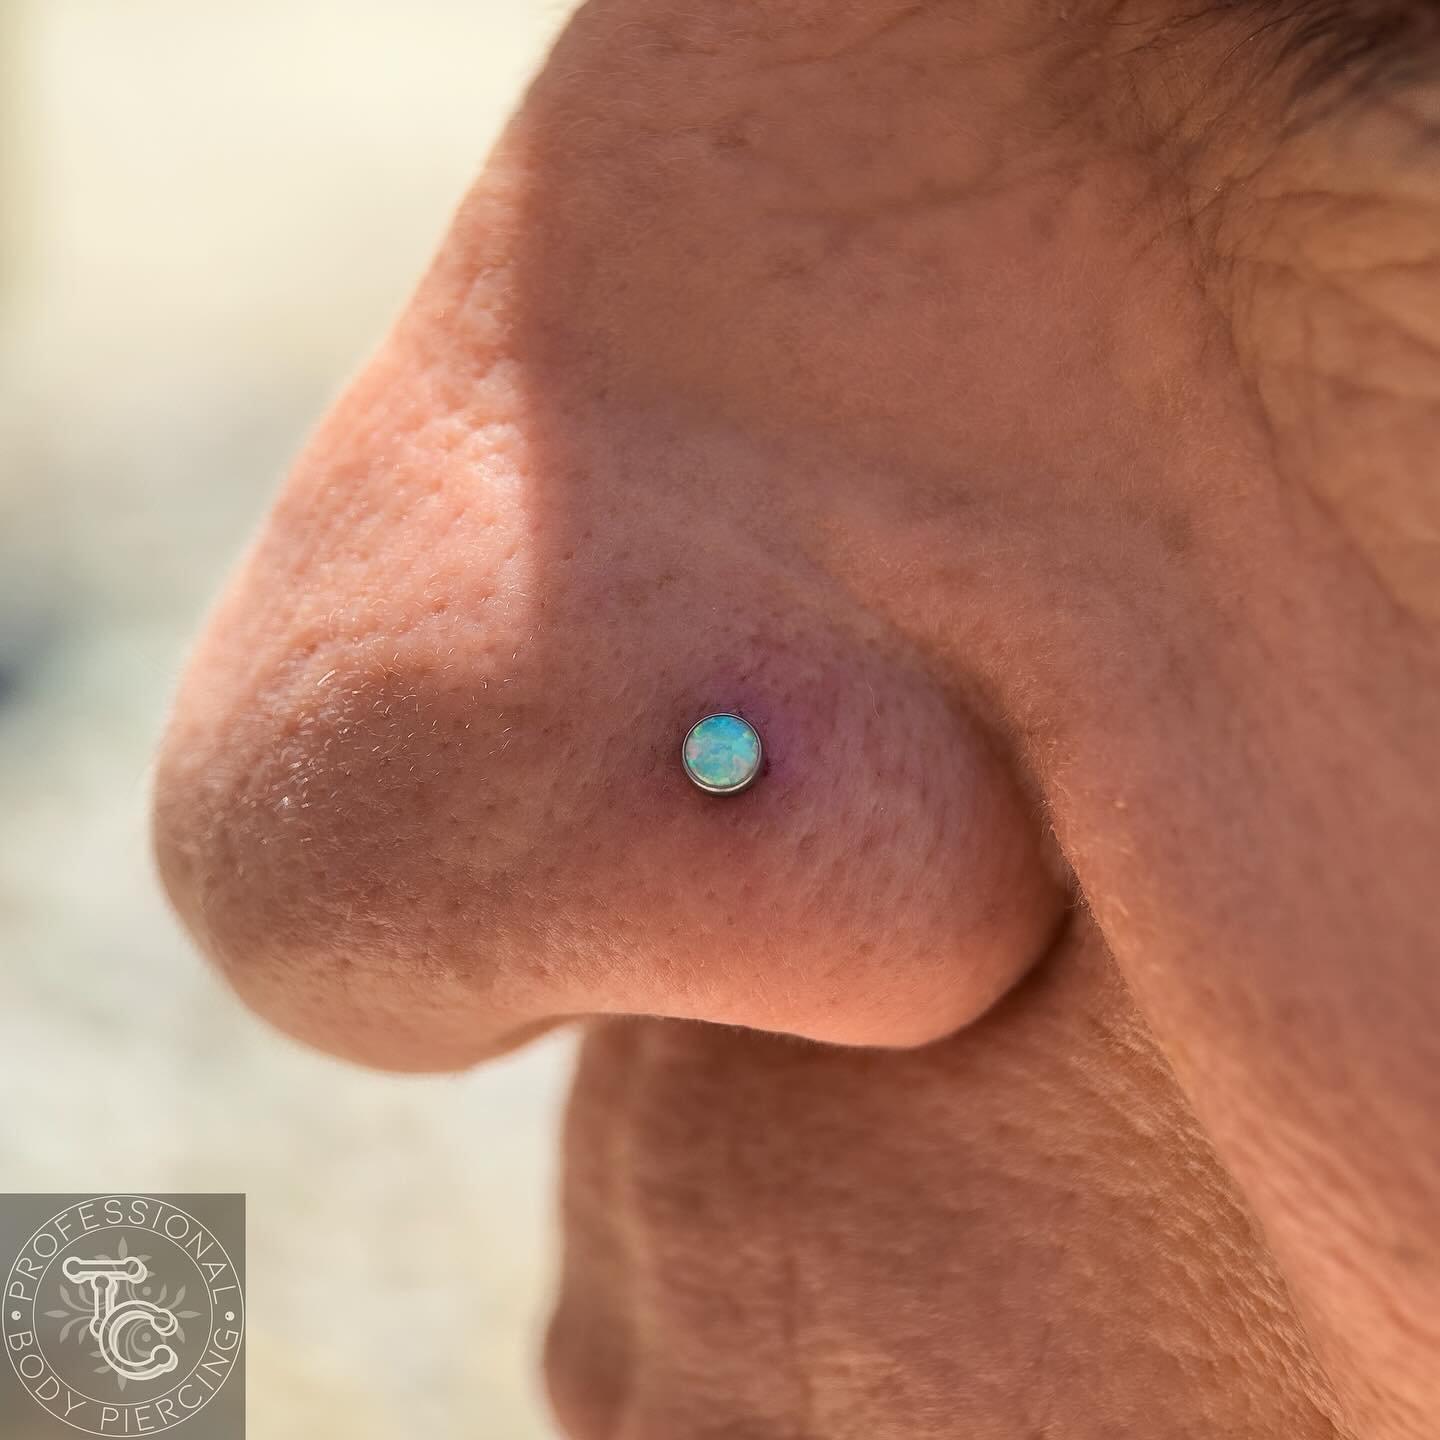 Nostril piercing from today! 

✨ Implant grade titanium 3mm Robin&rsquo;s Egg Opal cabochon end from @peoples_jewelry 
✨ Implant grade titanium labret post from @industrialstrength